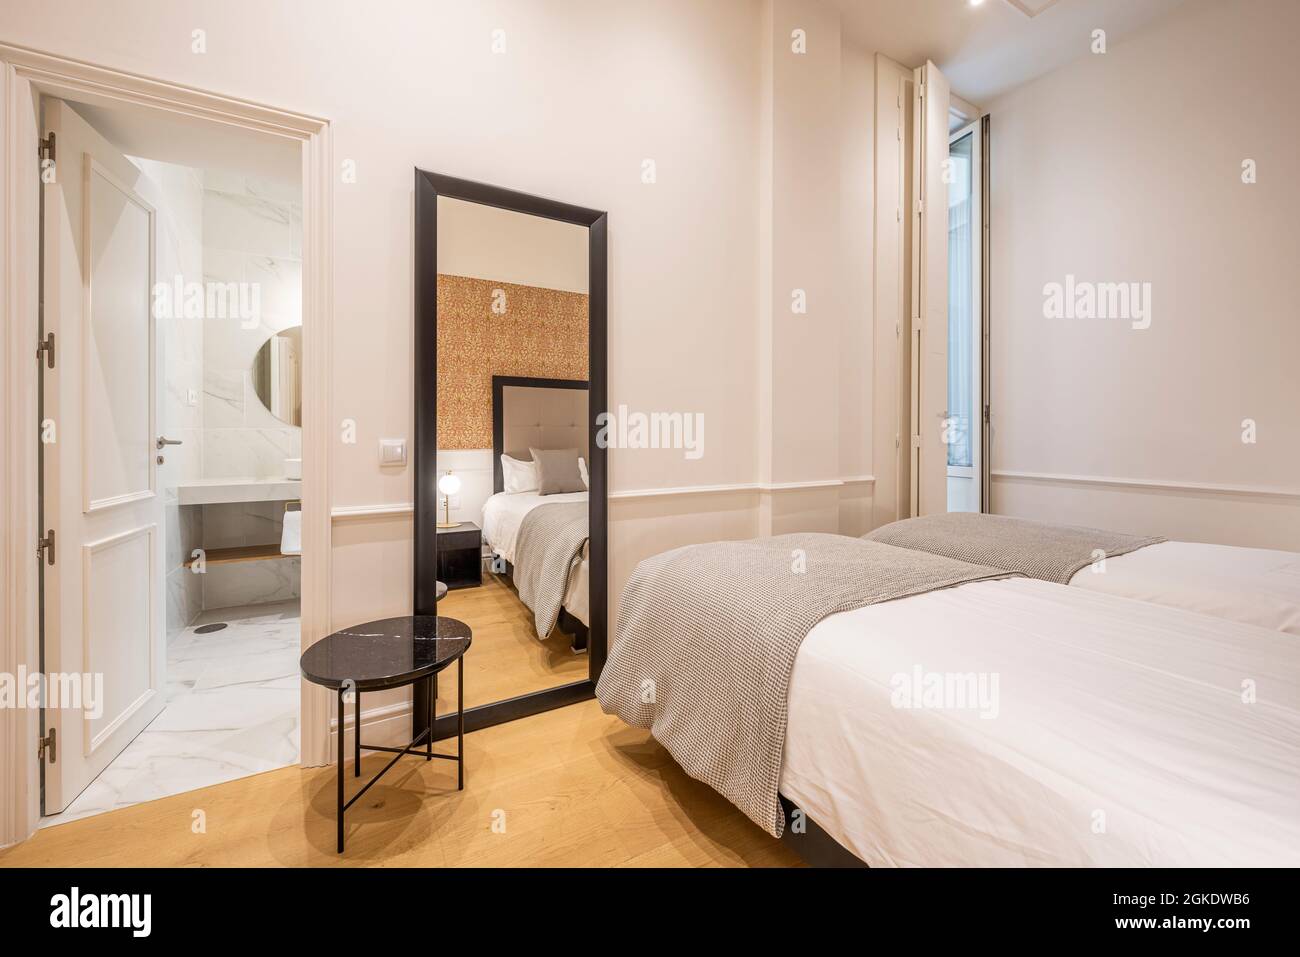 Bedroom with two beds and bathroom en suite, large full-length mirror in vacation rental apartment Stock Photo